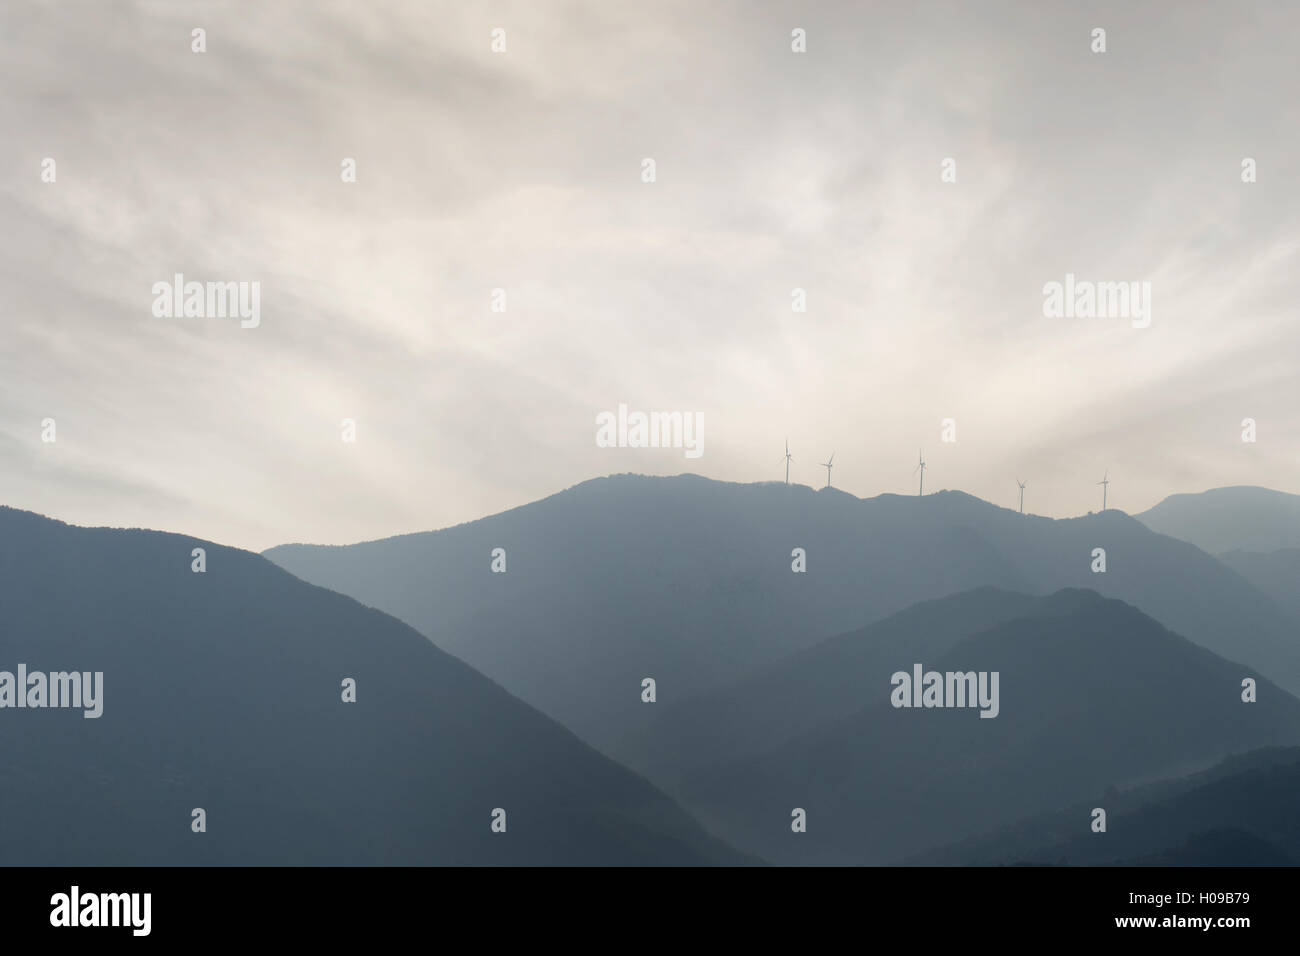 Atmospheric view of hills with wind turbines. Stock Photo